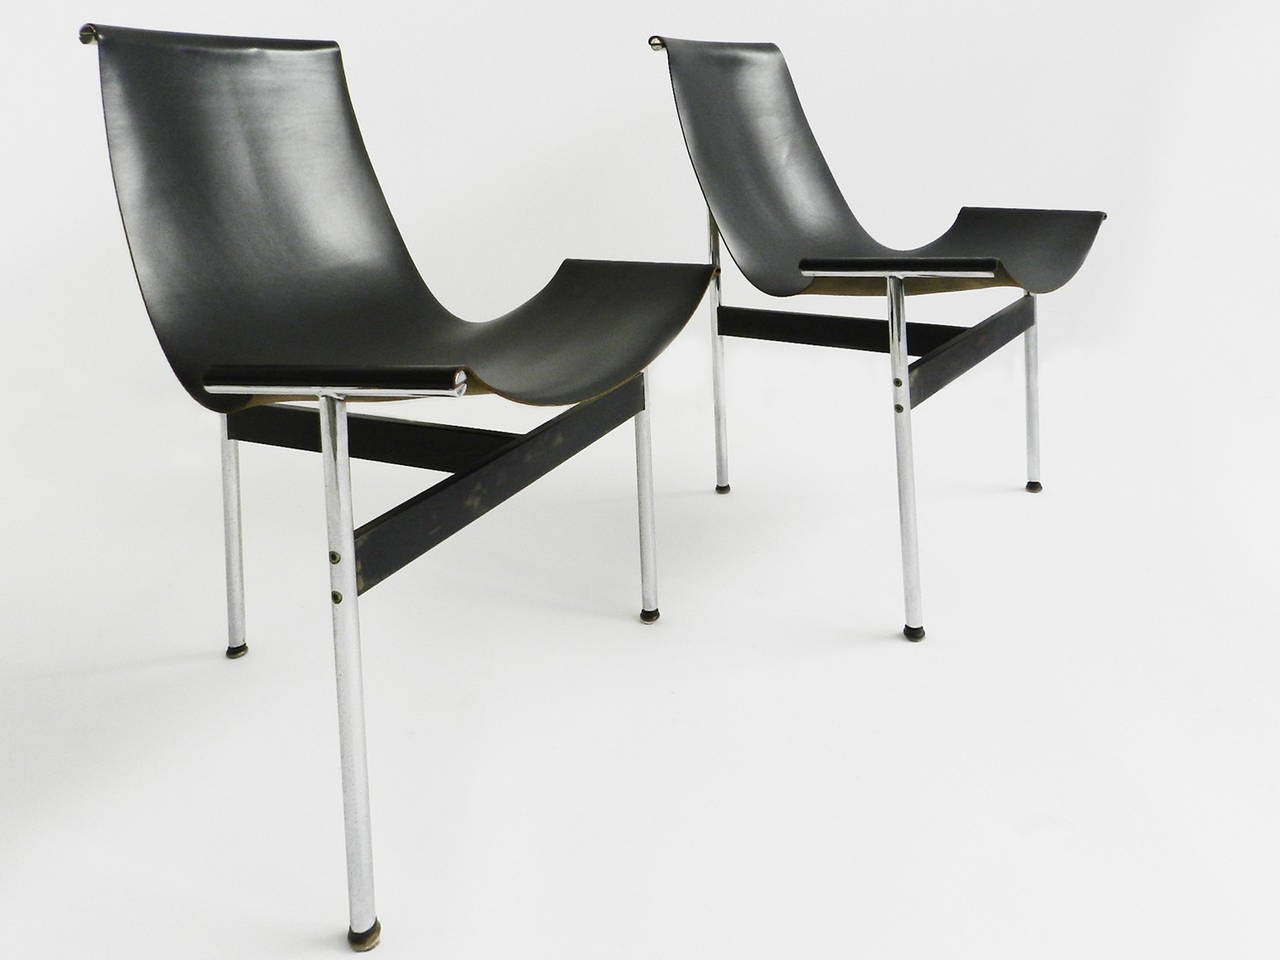 10 T- Chairs in black leather designed by William Katavolos, Ross Littell, and Douglas Kelley and produced by ICF, Italy.
These chairs were probably produced around 1980.